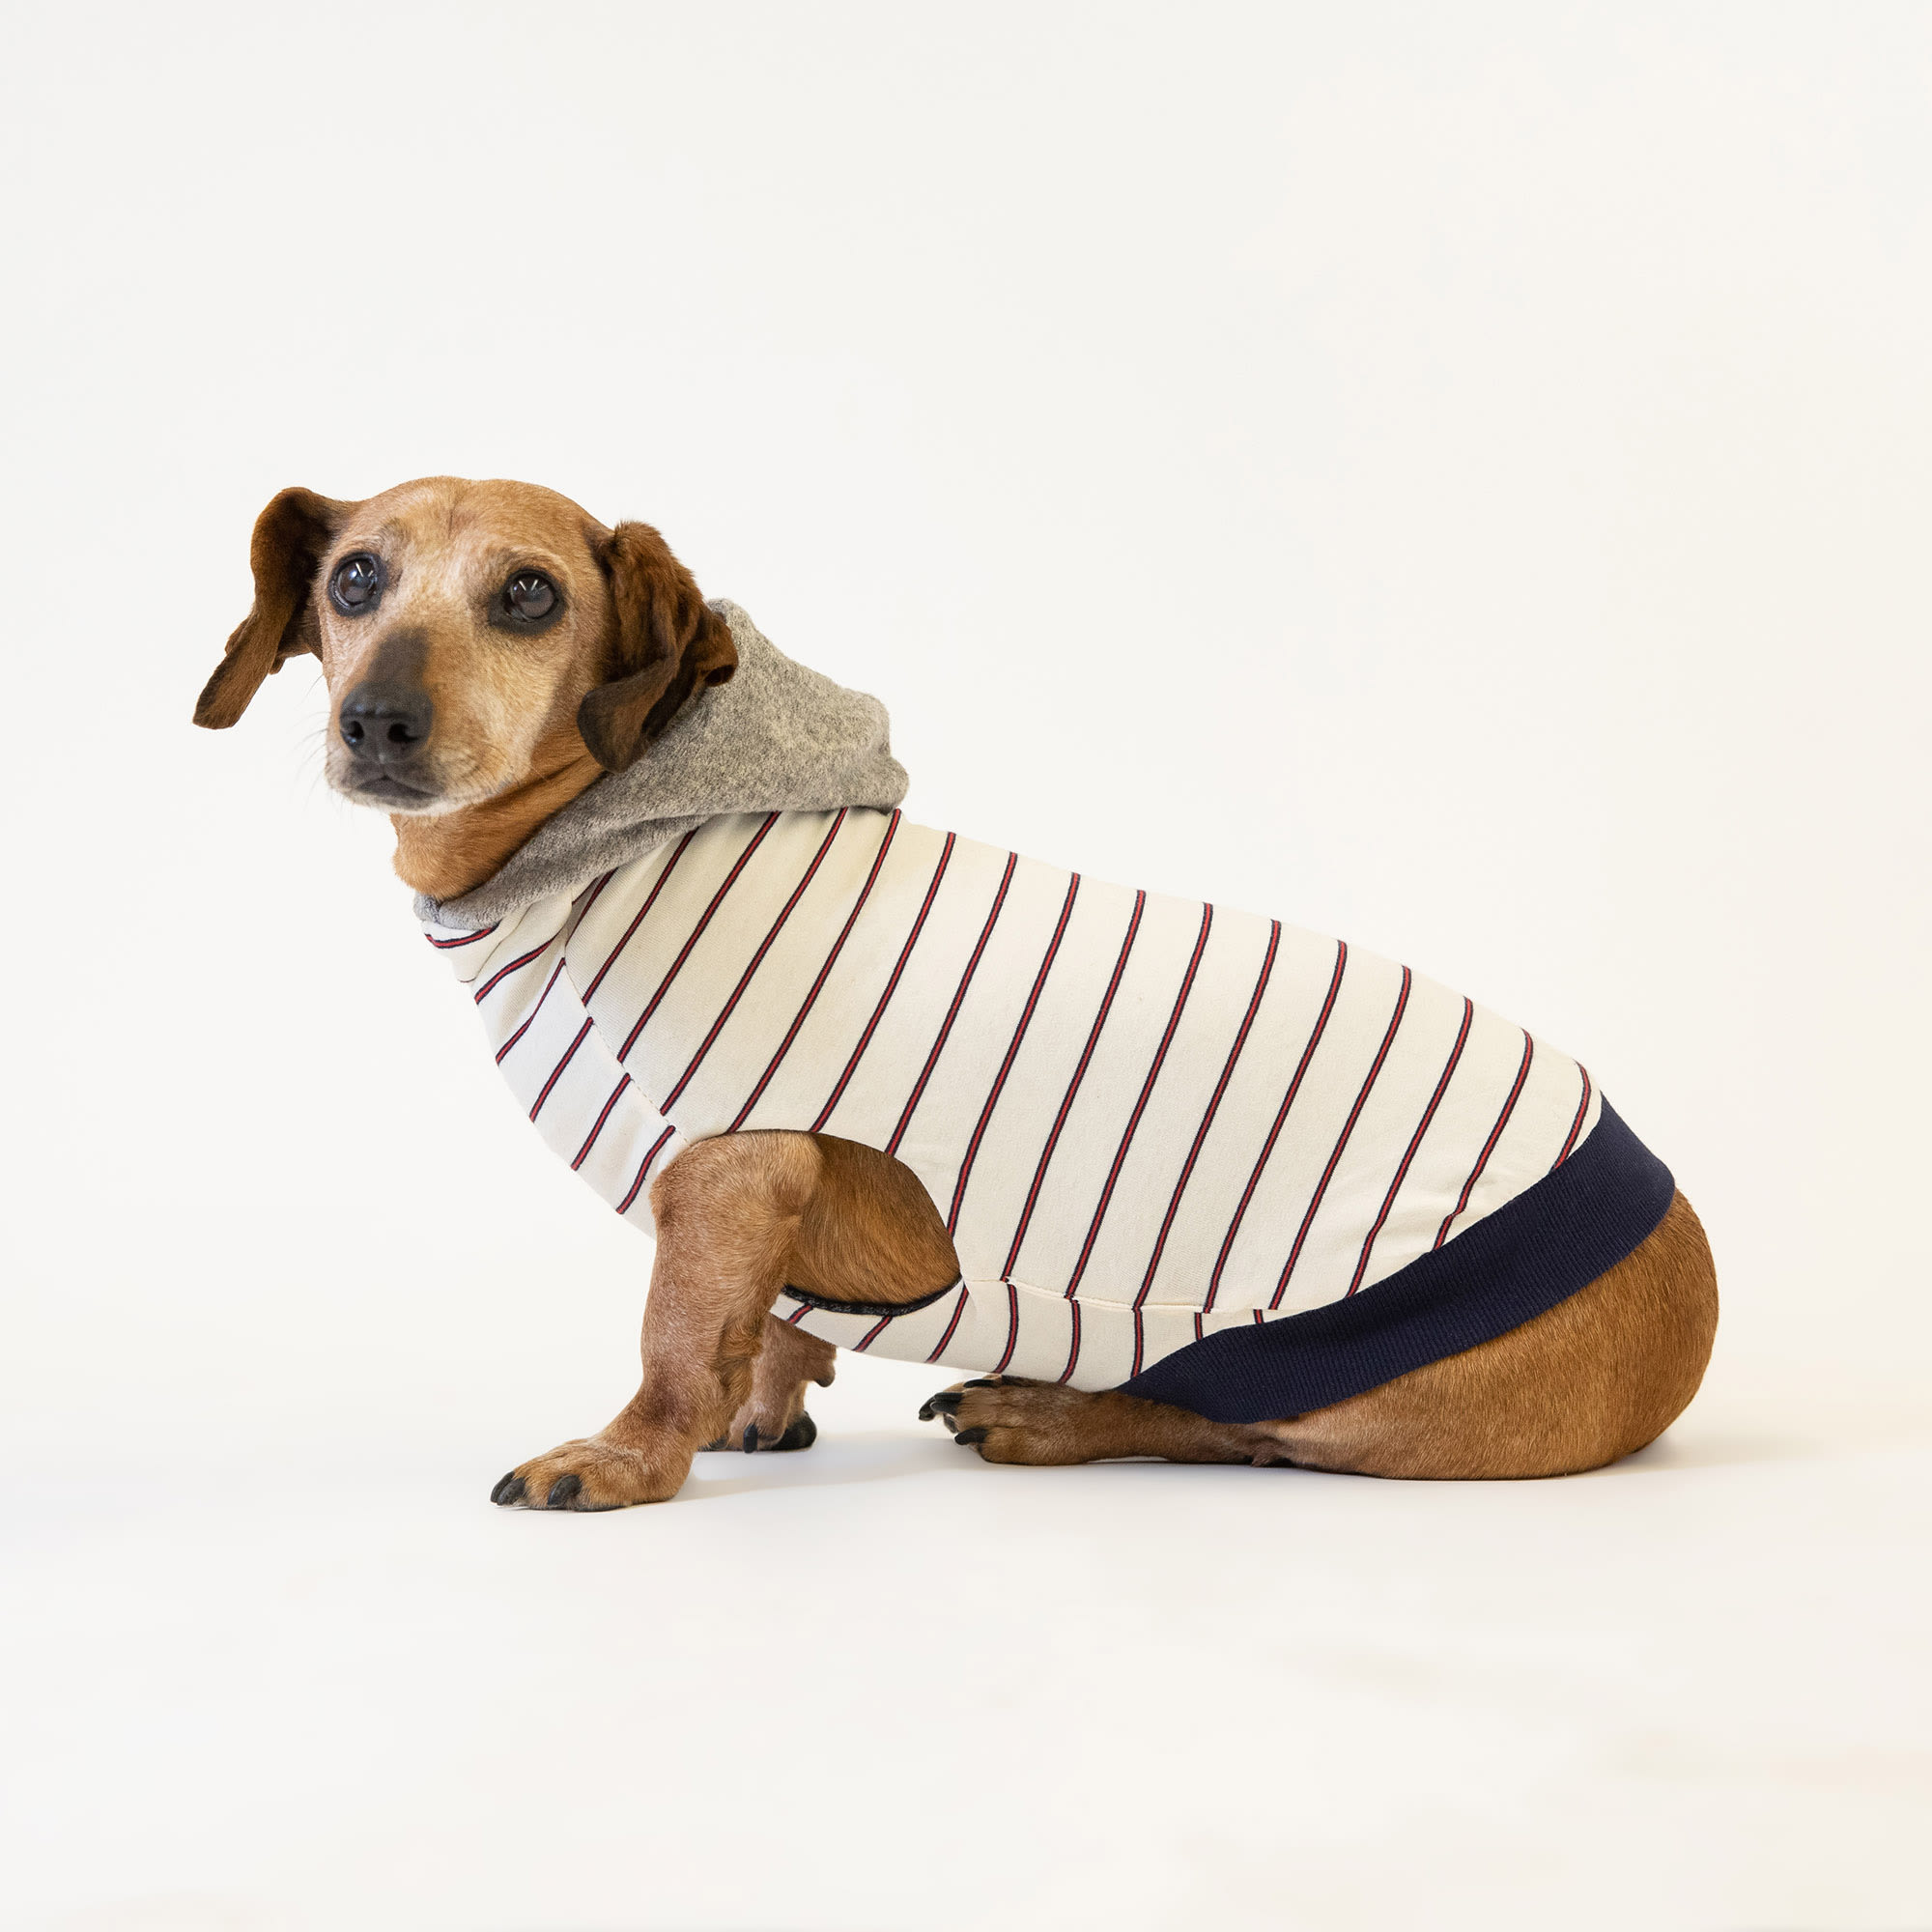 Long Dog Clothing Co. "The Abe" Reversible Navy Blue/Stripe Sweater Hoodie for Dogs, X-Small, Blue / Cream